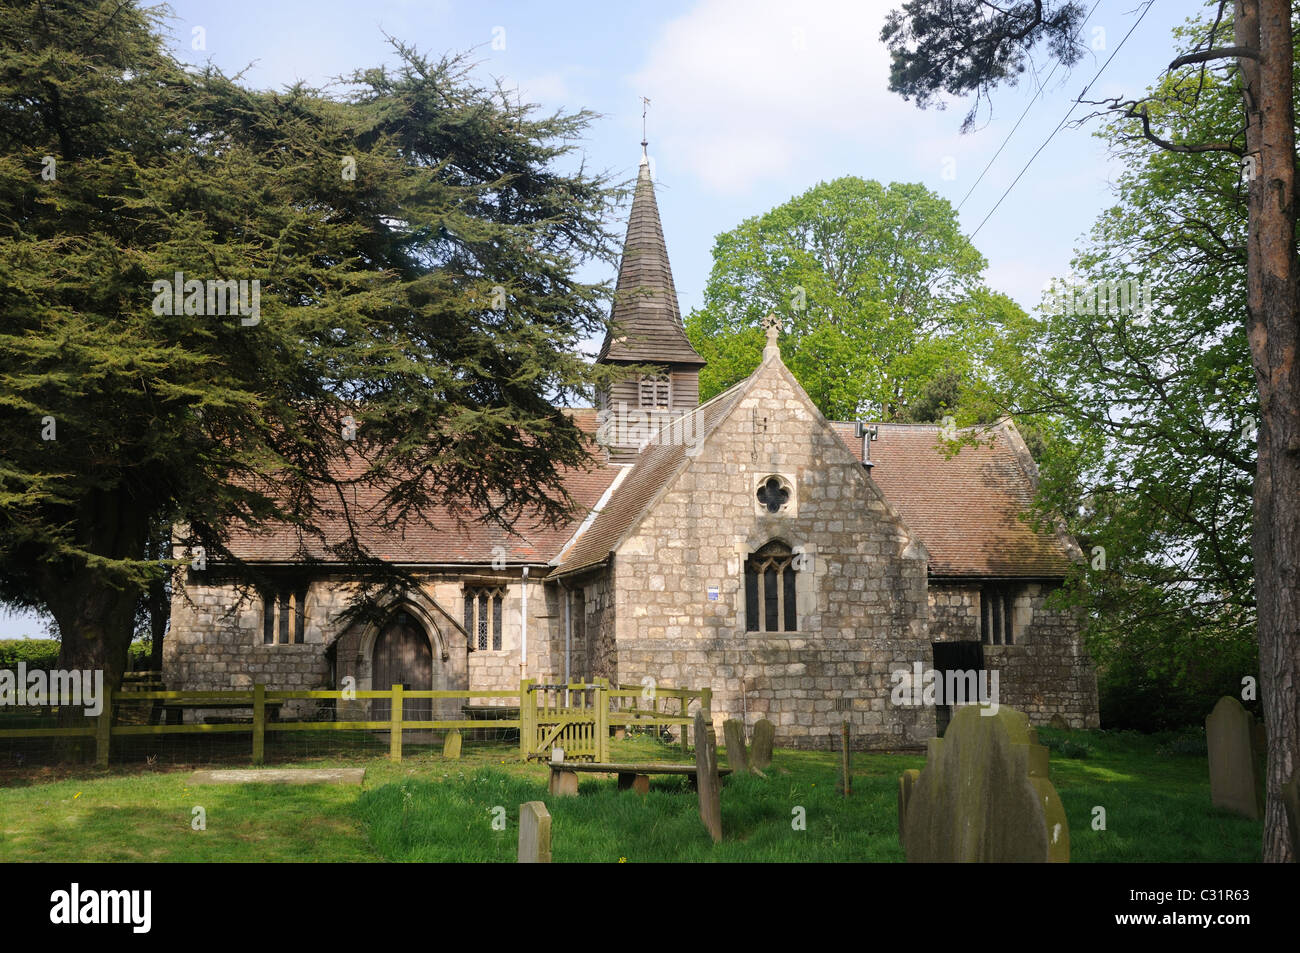 Spring at the Church of the Holy Trinity, in Acaster Malbis, Yorkshire, England Stock Photo